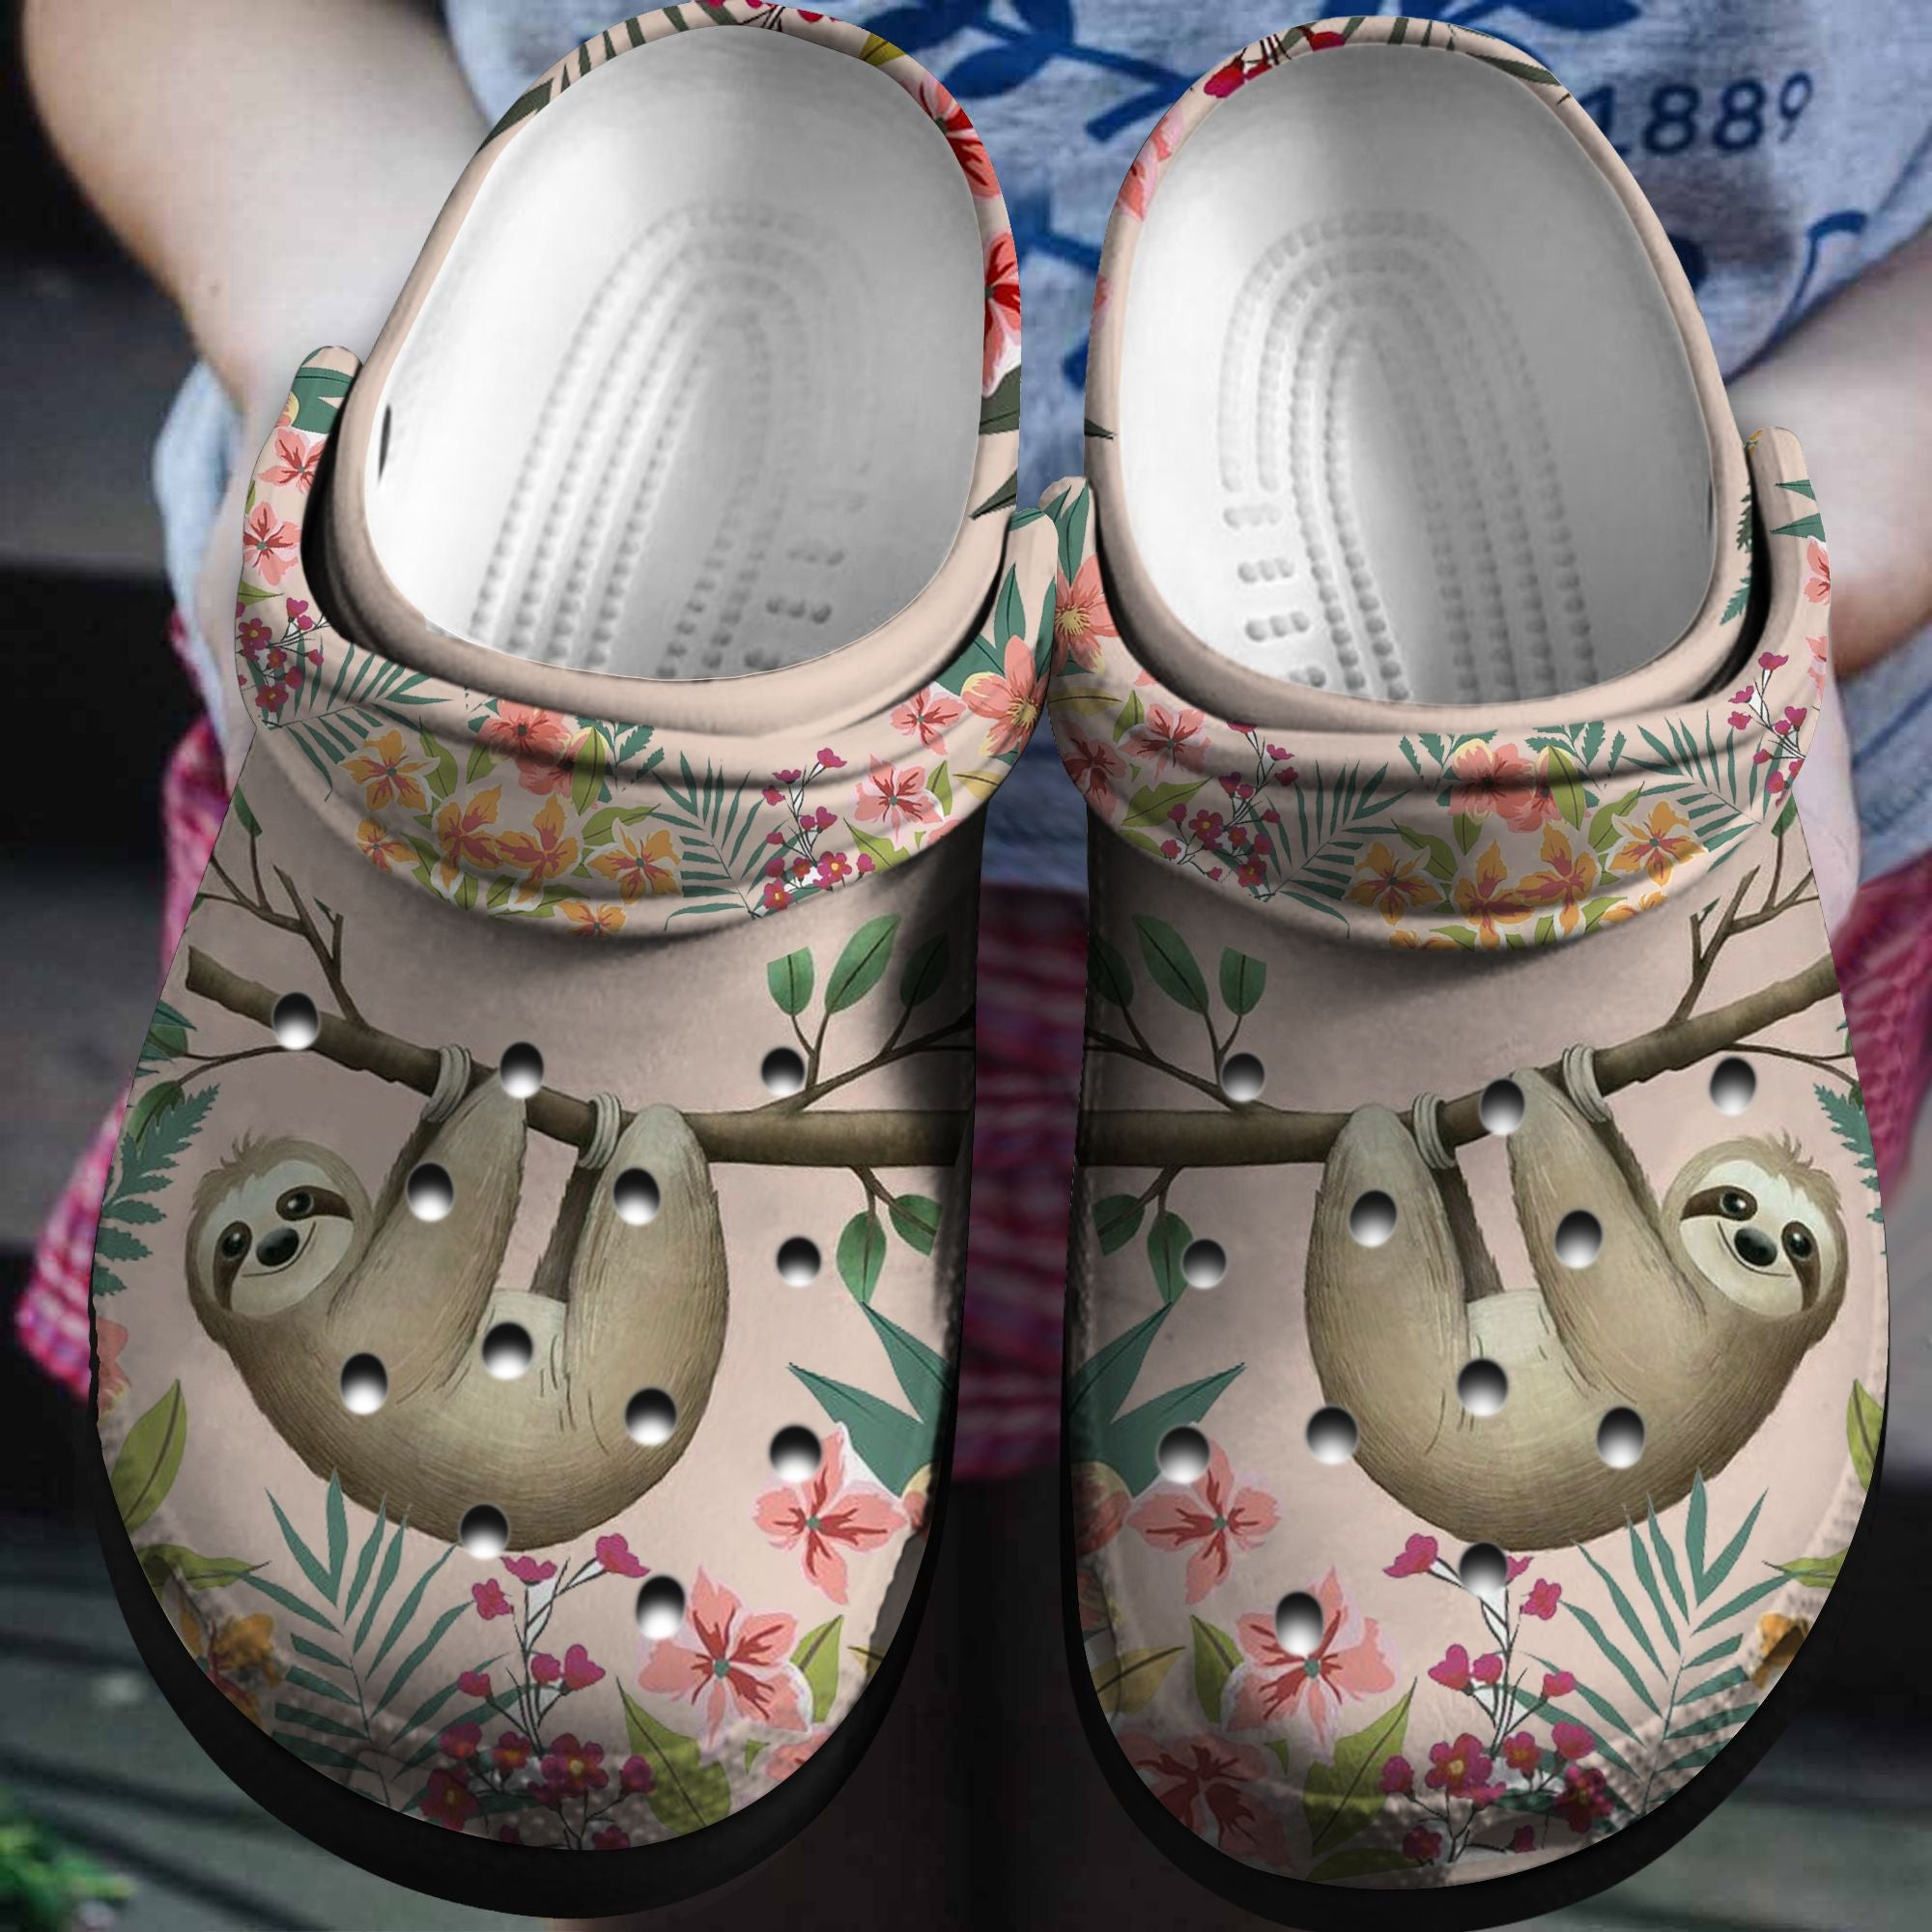 Hanging Sloth Flower Crocs Clog Shoes - Lovely Garden Custom Crocs Clog Shoes Birthday Gift For Men and Women